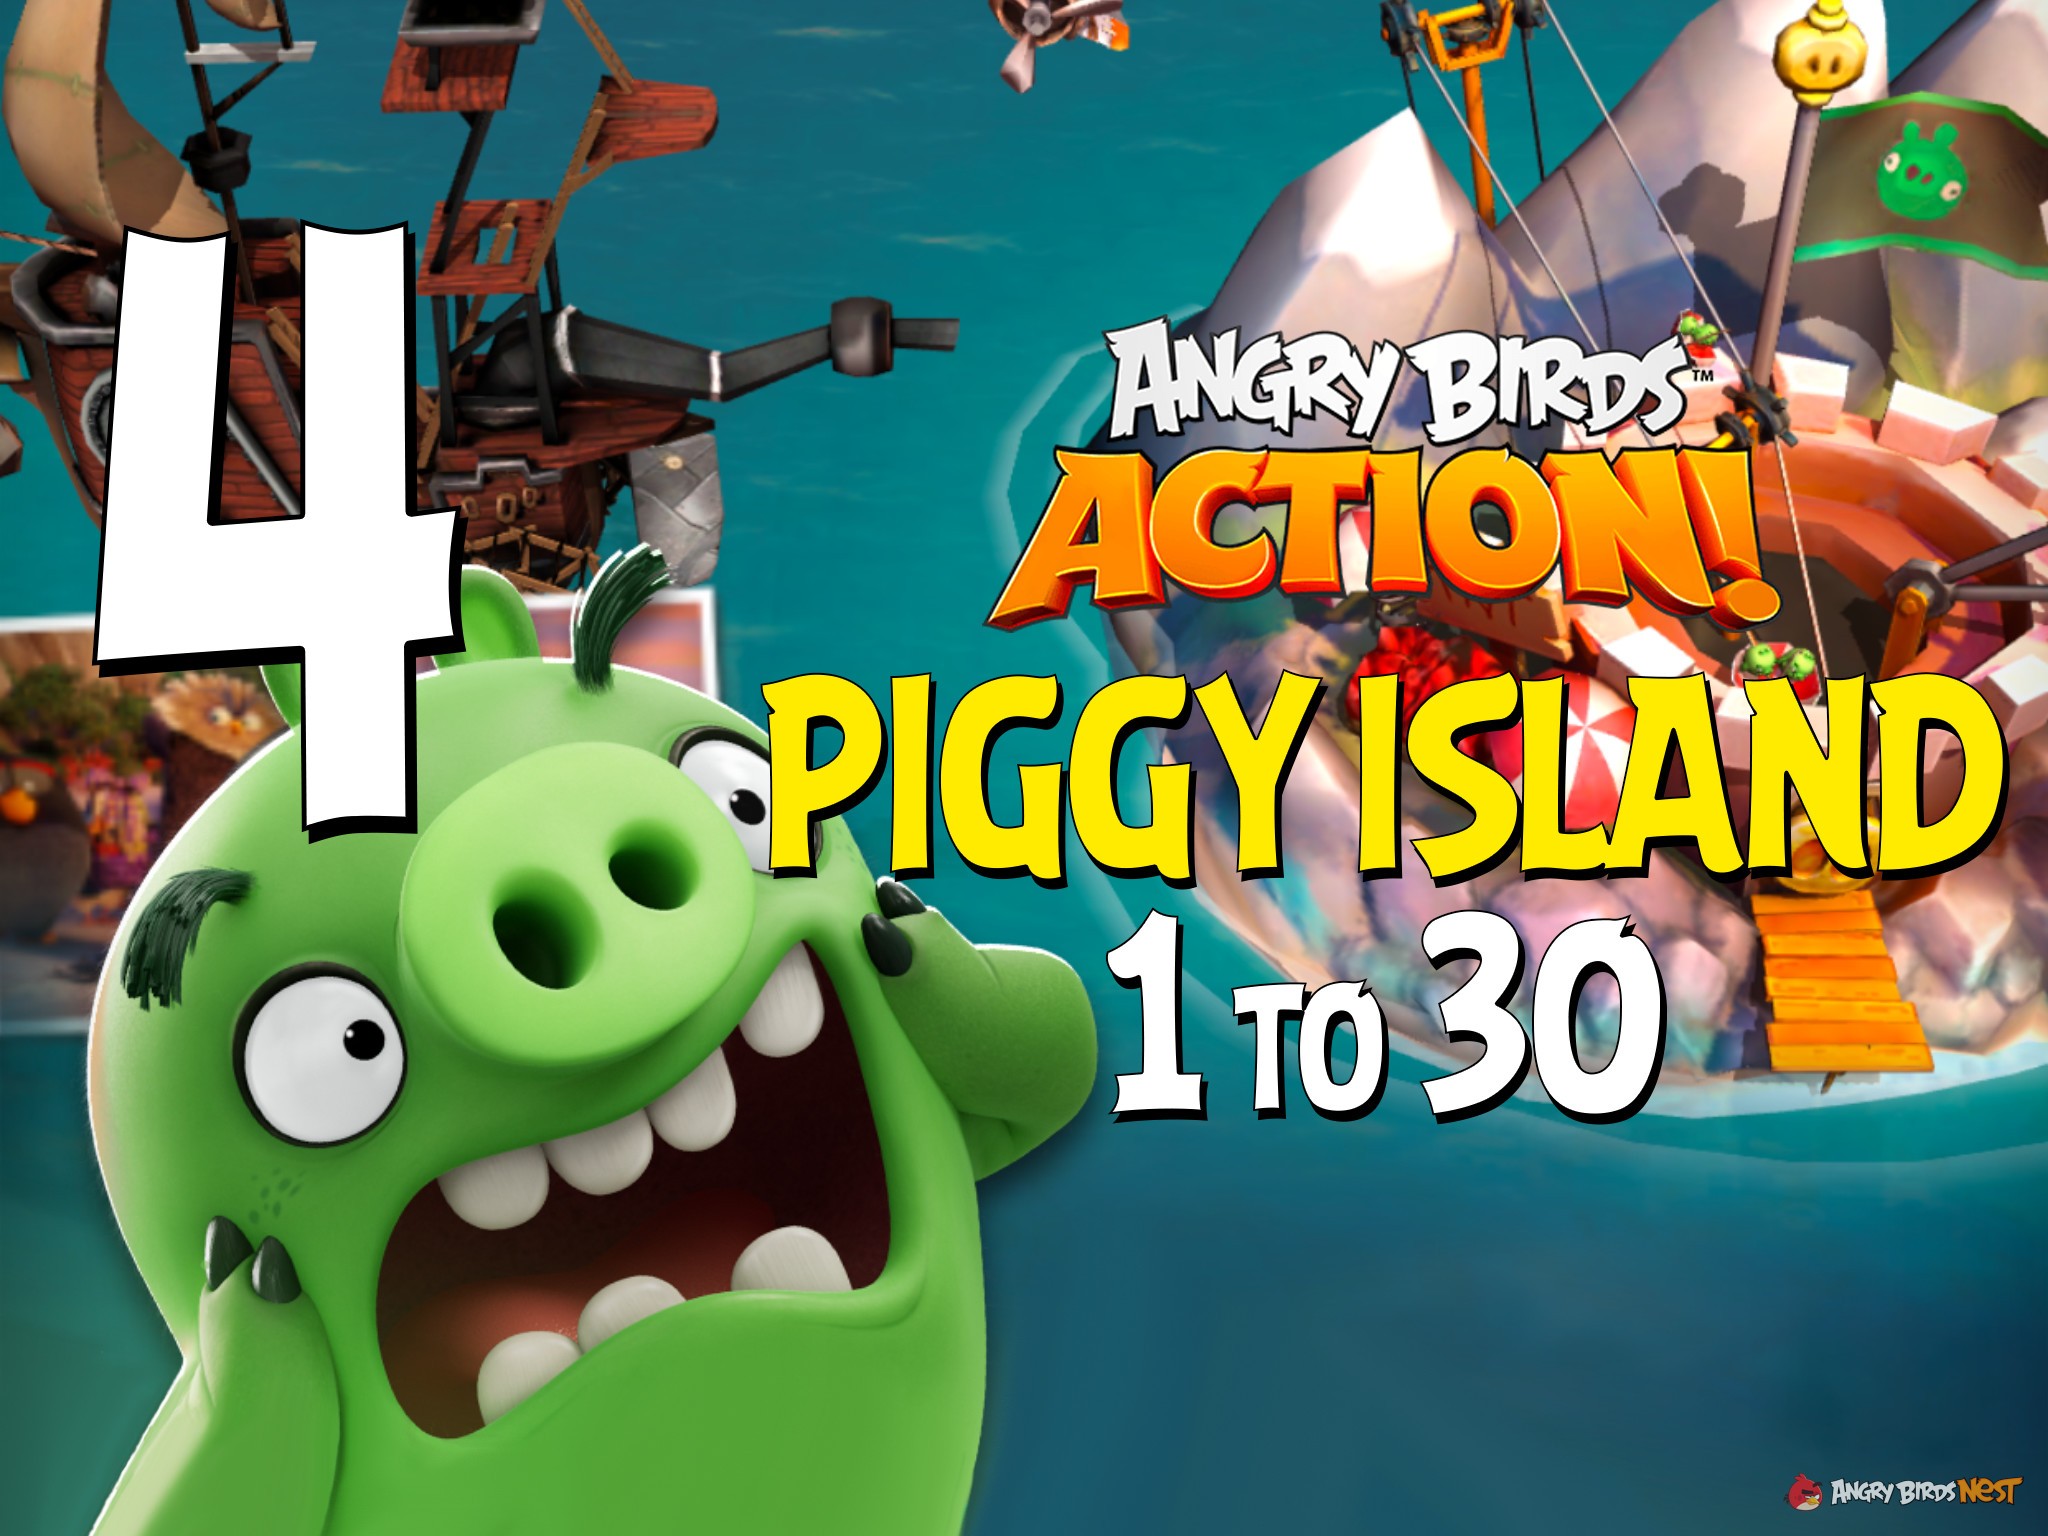 Angry Birds Action! Part 4 - Levels 1 to 30 - Piggy Island